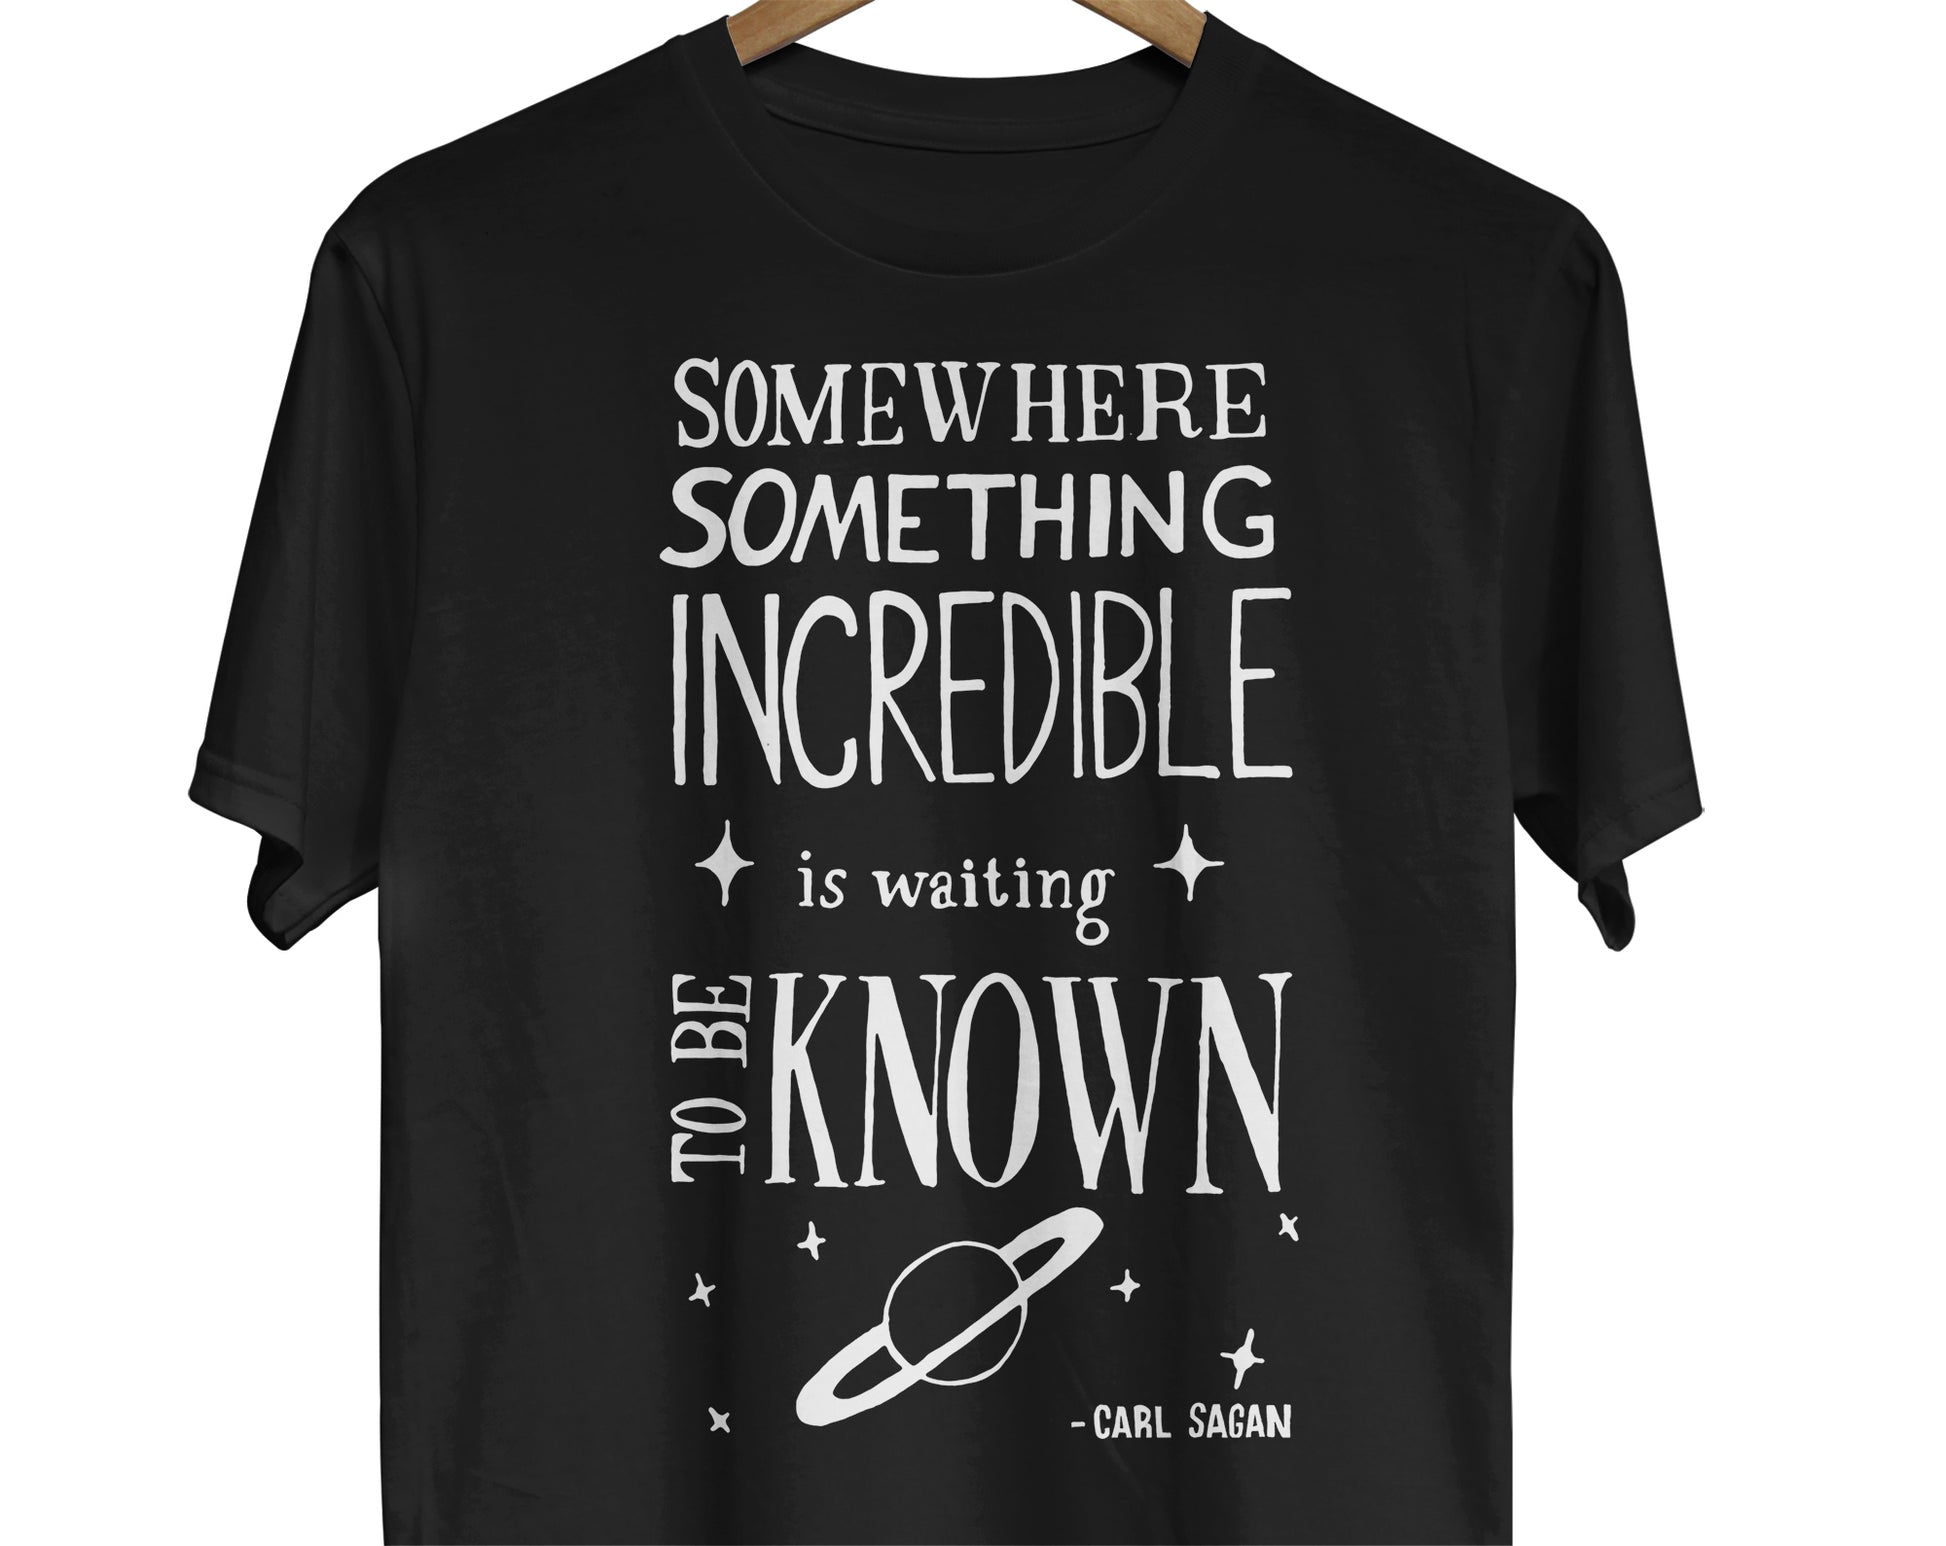 Carl Sagan Science Quote T-Shirt: A visually captivating design featuring a hand-lettered quote by Carl Sagan that reads, 'Somewhere, something incredible is waiting to be known.' The quote is beautifully presented with artistic lettering, evoking a sense of wonder and inspiration.